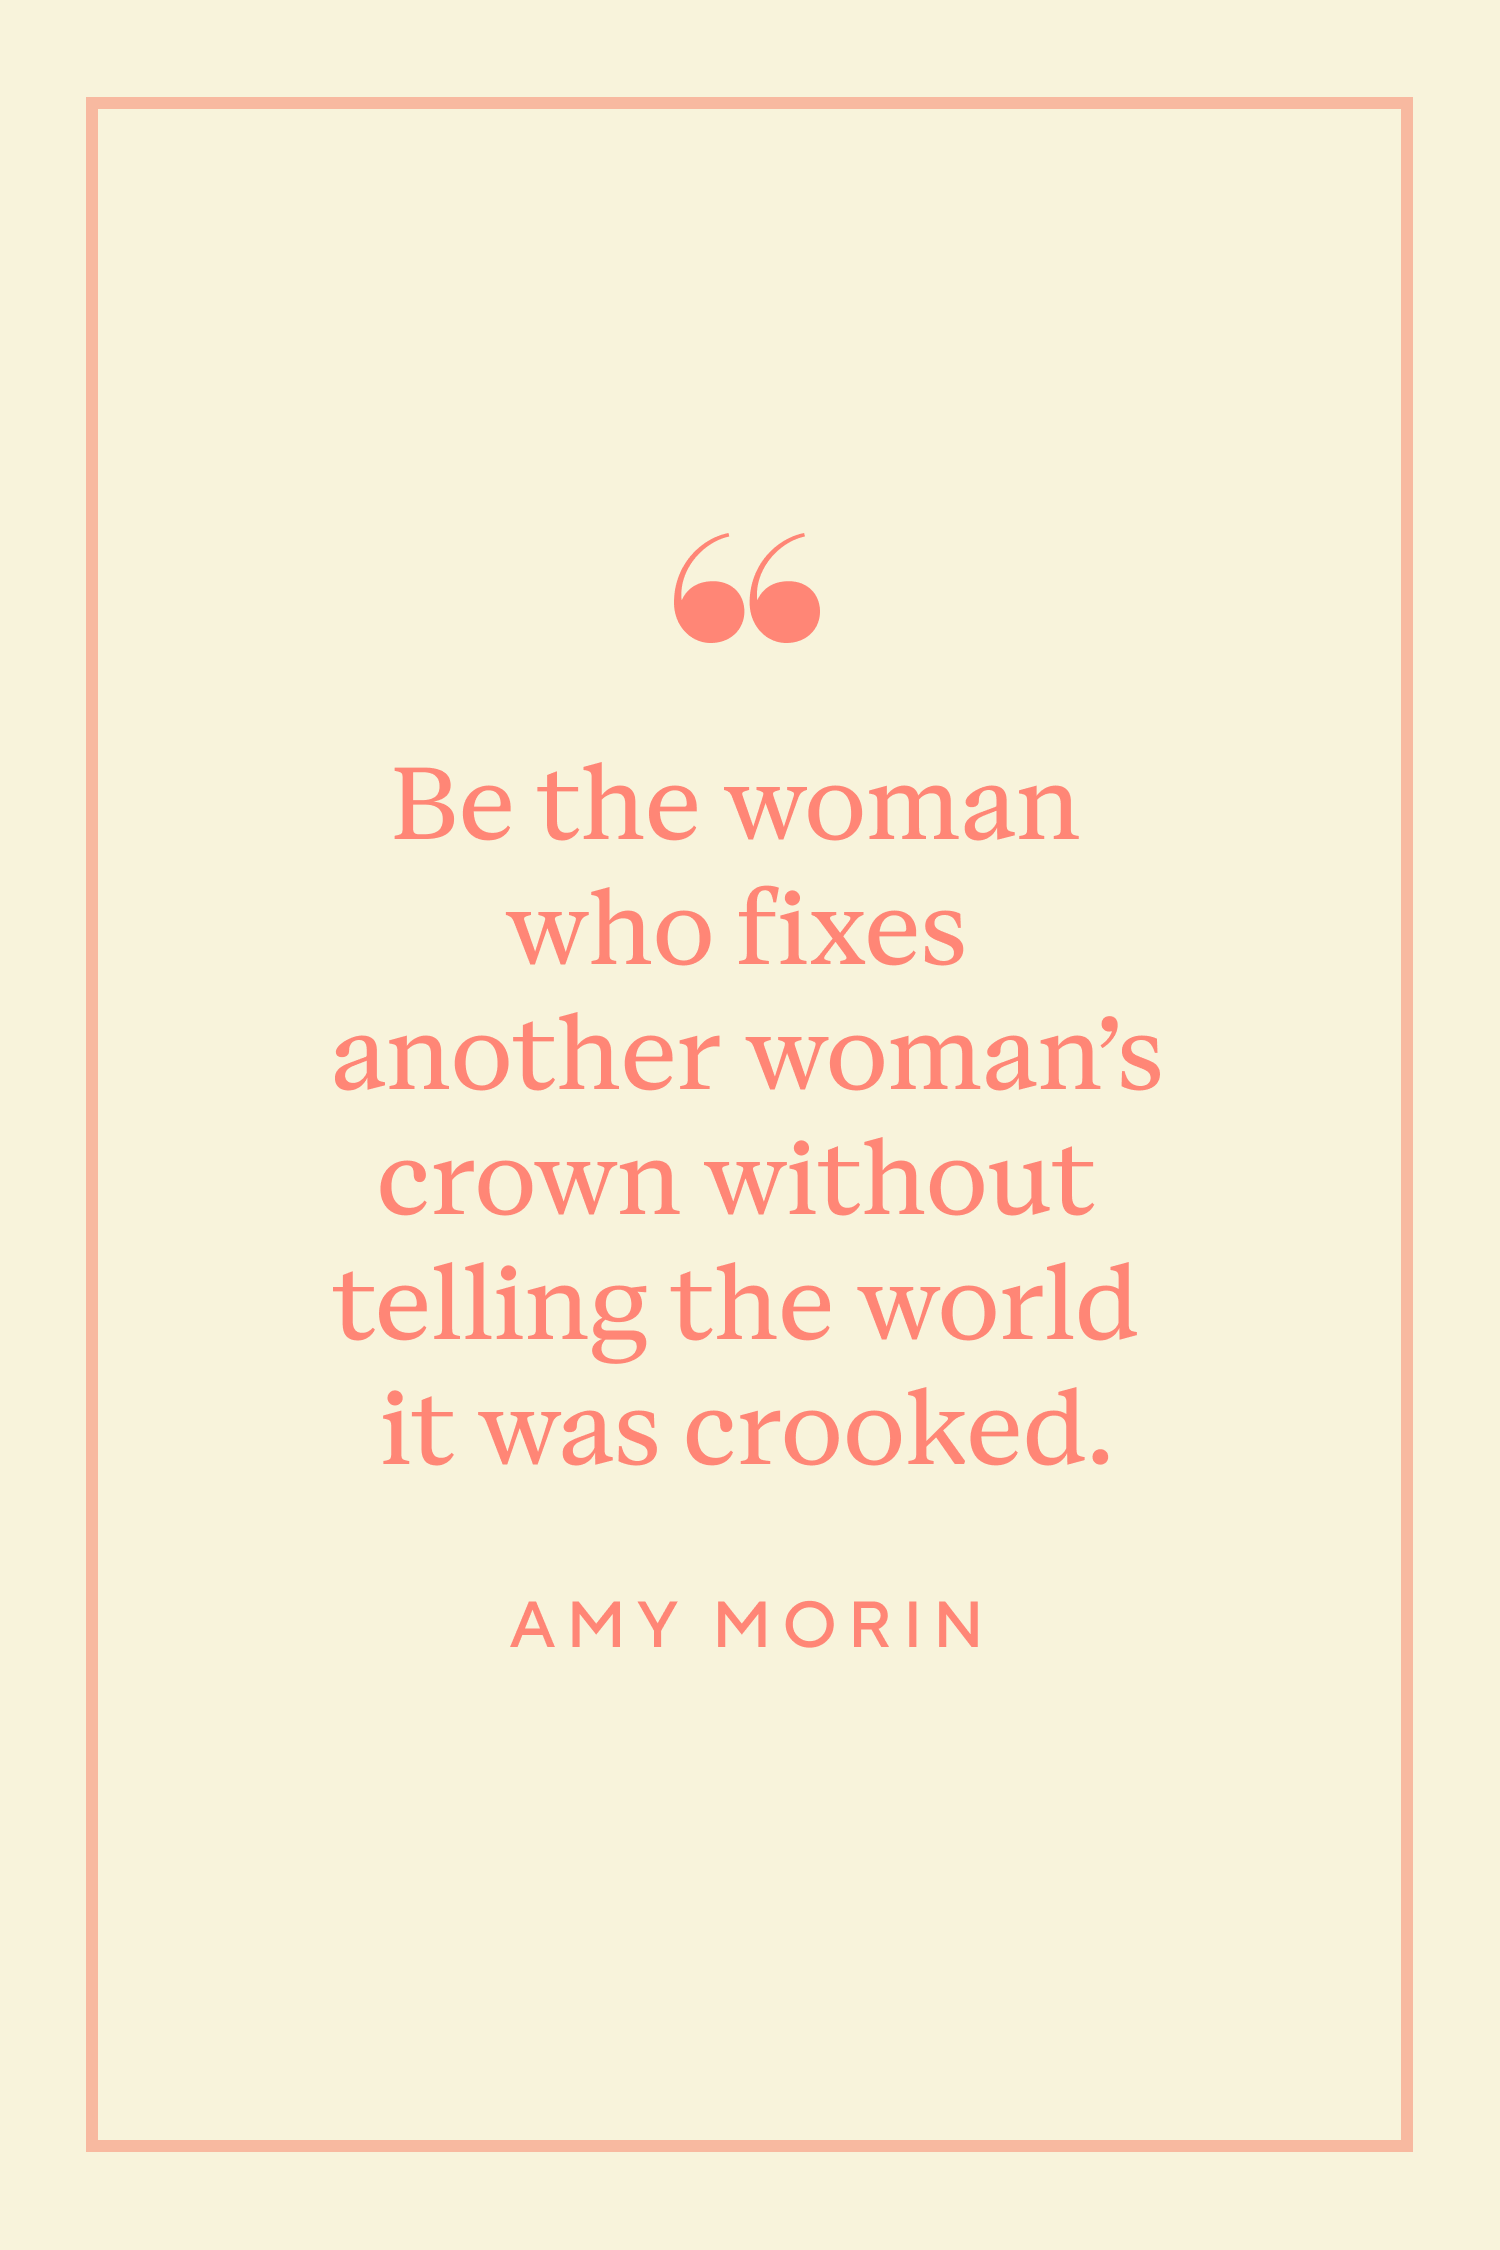 Here's to the extraordinary women who uplift, empower, and inspire